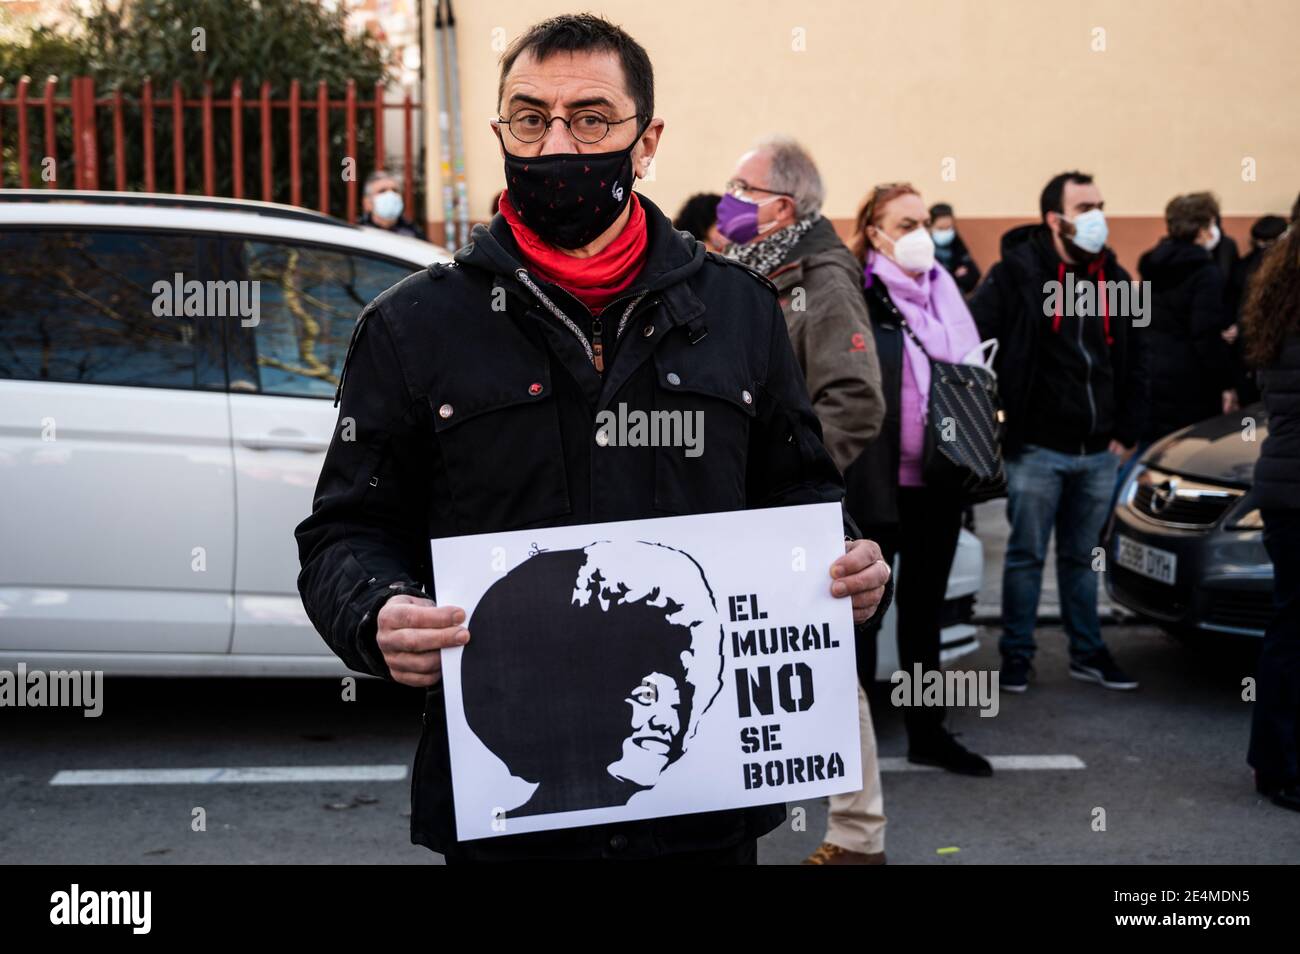 Juan Carlos Monedero, former leading member of Podemos party holding a placard with the picture of Angela Davis and the words 'the mural should not be erased', during a protest against the removal proposed by far-right party VOX of a feminist mural named 'Union makes force'. In the mural appear the faces of 15 women who are part of history for their fight in favor of equality: Angela Davis, Frida Kahlo, Nina Simone, Rigoberta Menchu, Lucia Sanchez Saornil, Rosa Arauzo, Valentina Tereshkova, Chimamanda Ngozi, Emma Goldman, Kanno Sugato, Liudmila Pavlichenko, Billy Jean King, Gata Cattana, Rosa Stock Photo